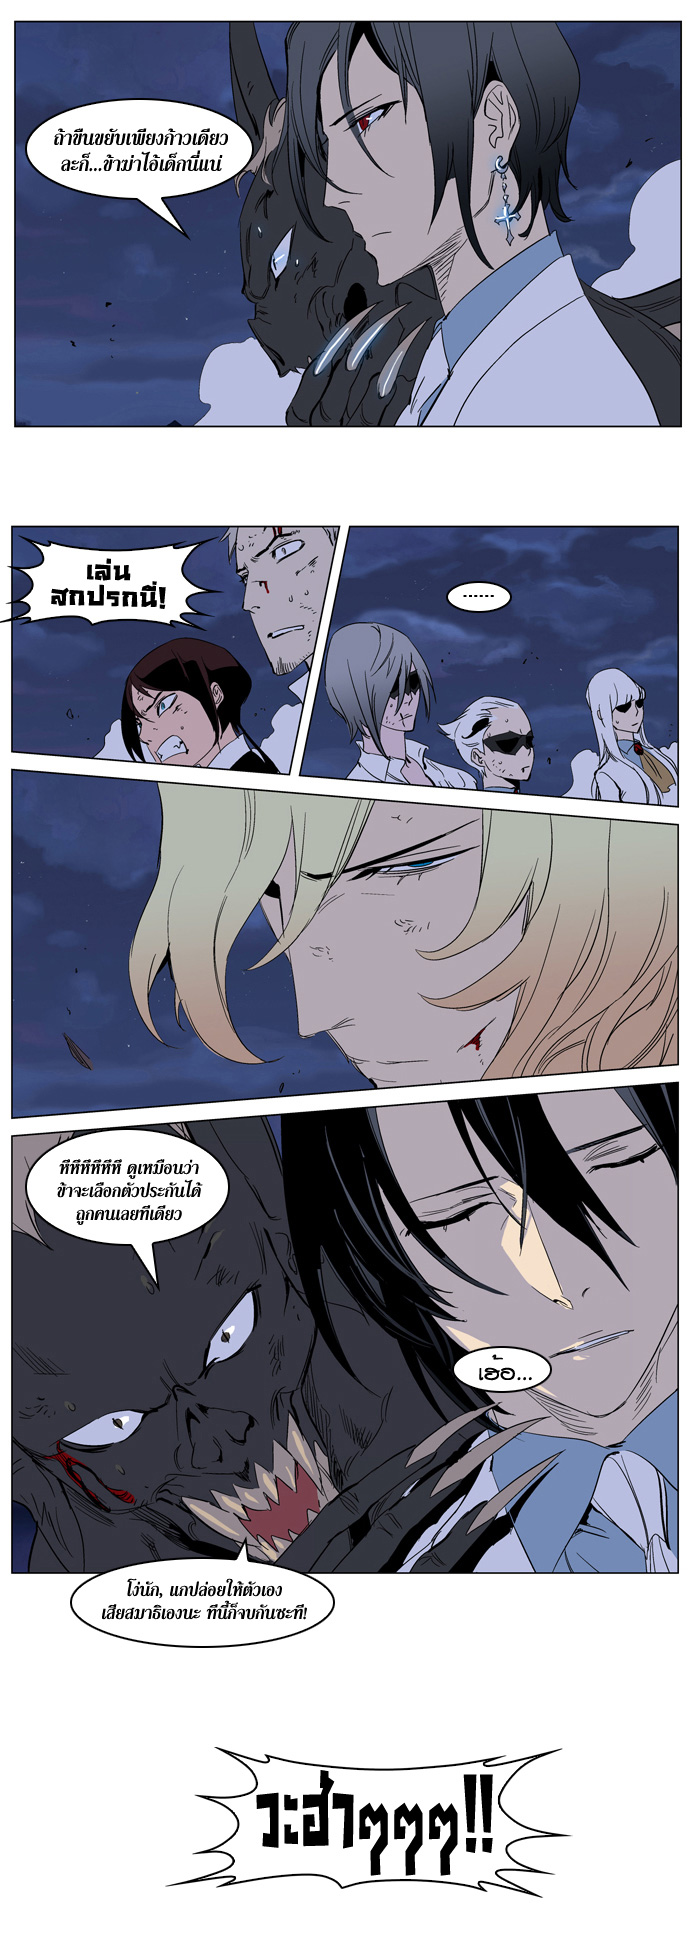 Noblesse 233 016